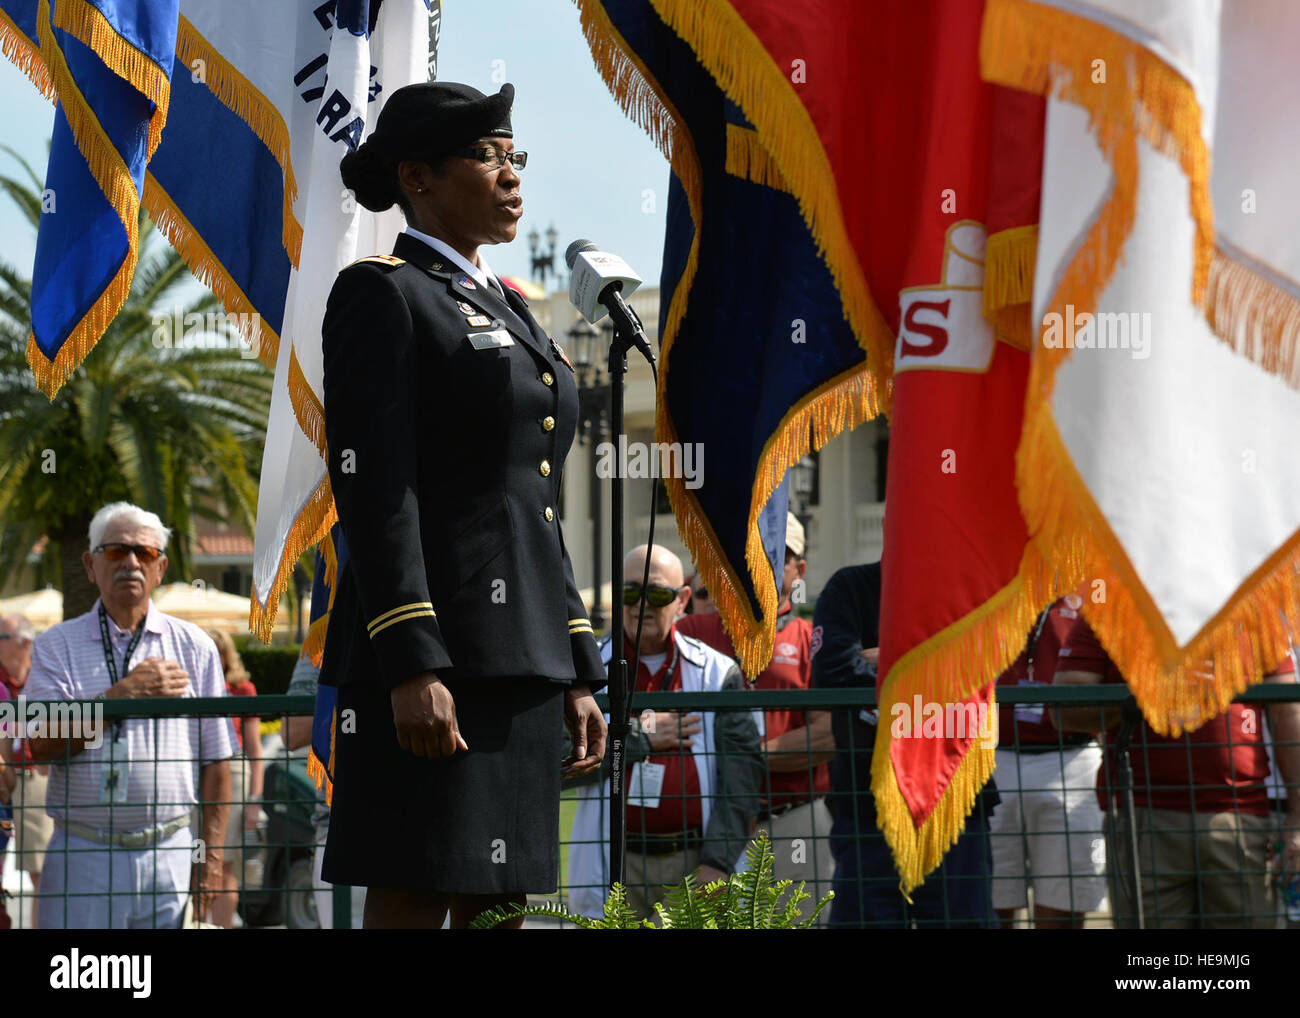 Army Maj. Delmayca Kramer, a 12-year veteran and native of Hephzibah, Ga., who works in the J-1 Personnel division of U.S. Southern Command in Miami, Fla., performs the National Anthem at the opening ceremony of the World Golf Championship. The event, one of the sports largest, is being held through March 6 at the Trump National Doral.  Raymond Sarracino/U.S. Southern Command Public Affairs) Stock Photo